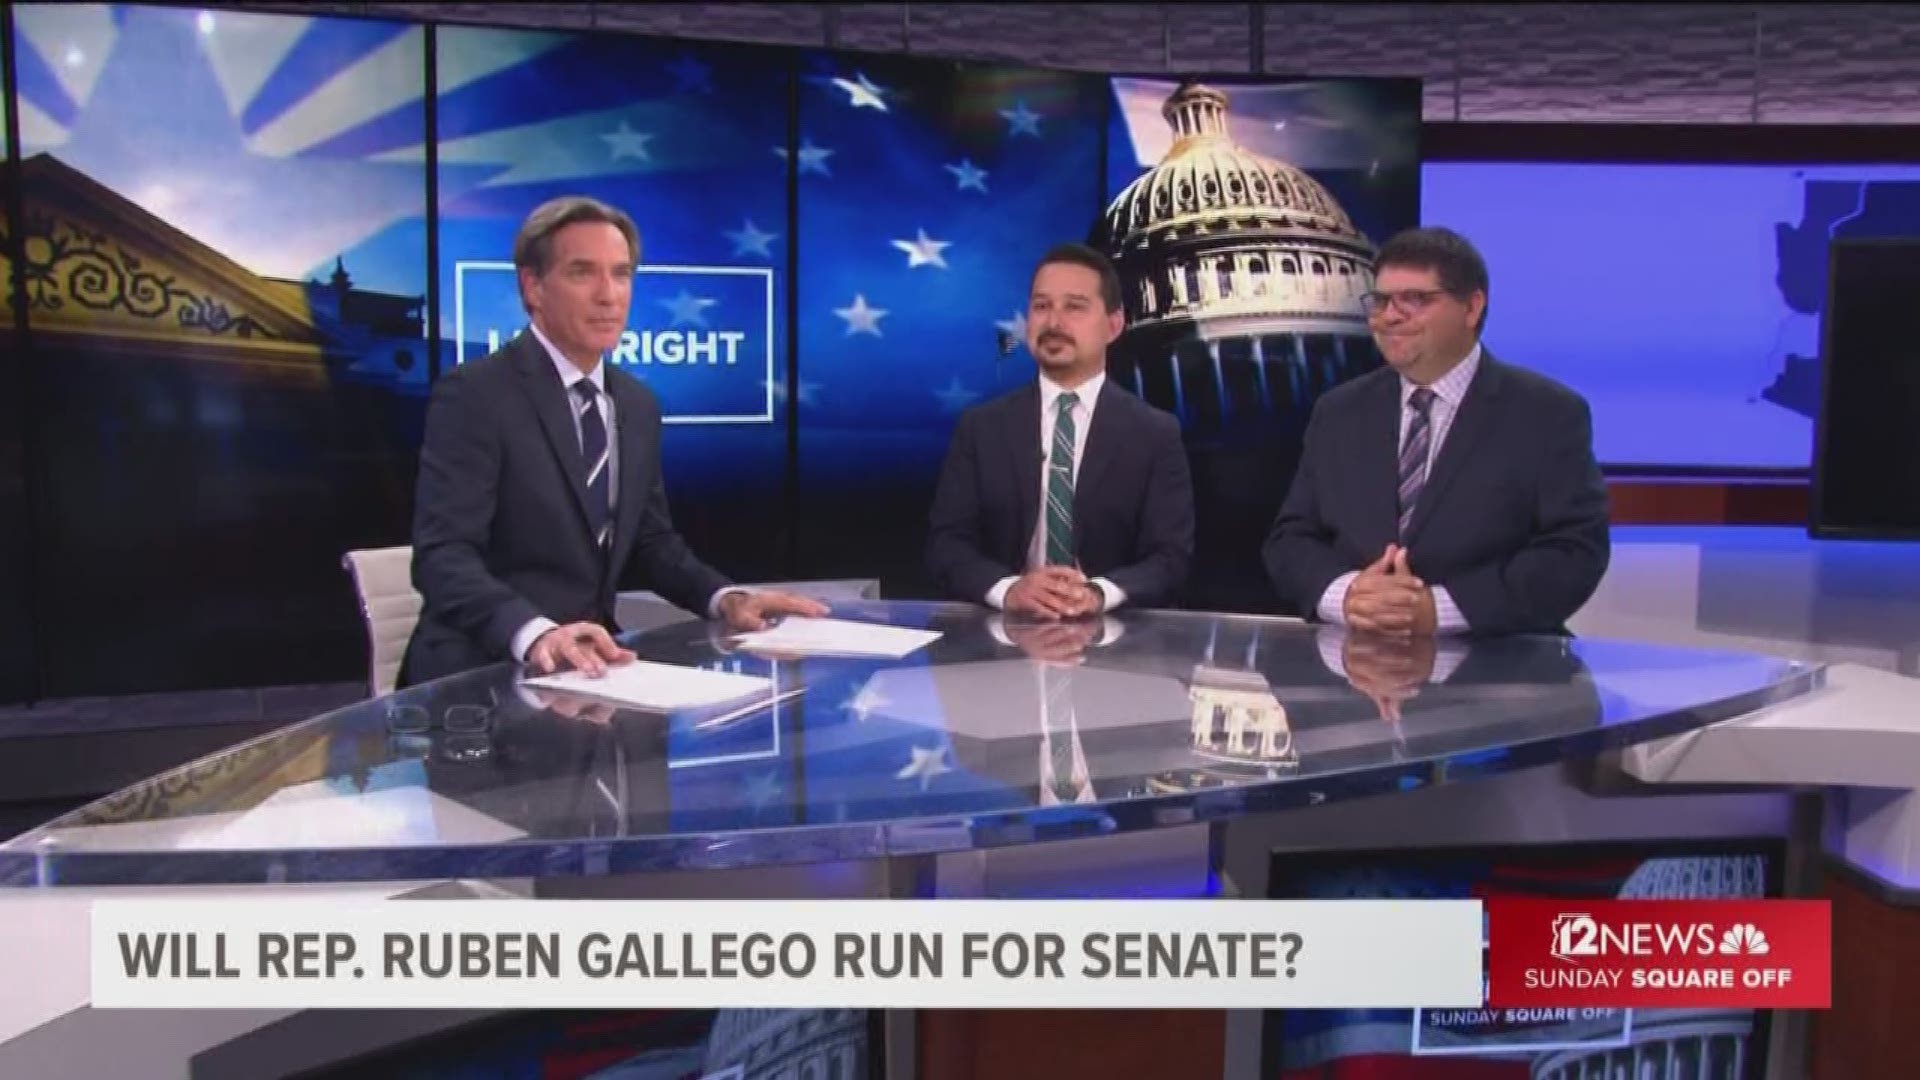 Democratic Congressman Ruben Gallego of Phoenix is planning to announce his run for the U.S. Senate next month, according to a political insider. Whom would Republican Sen. Martha McSally rather face in 2020: Gallego or former astronaut Mark Kelly?